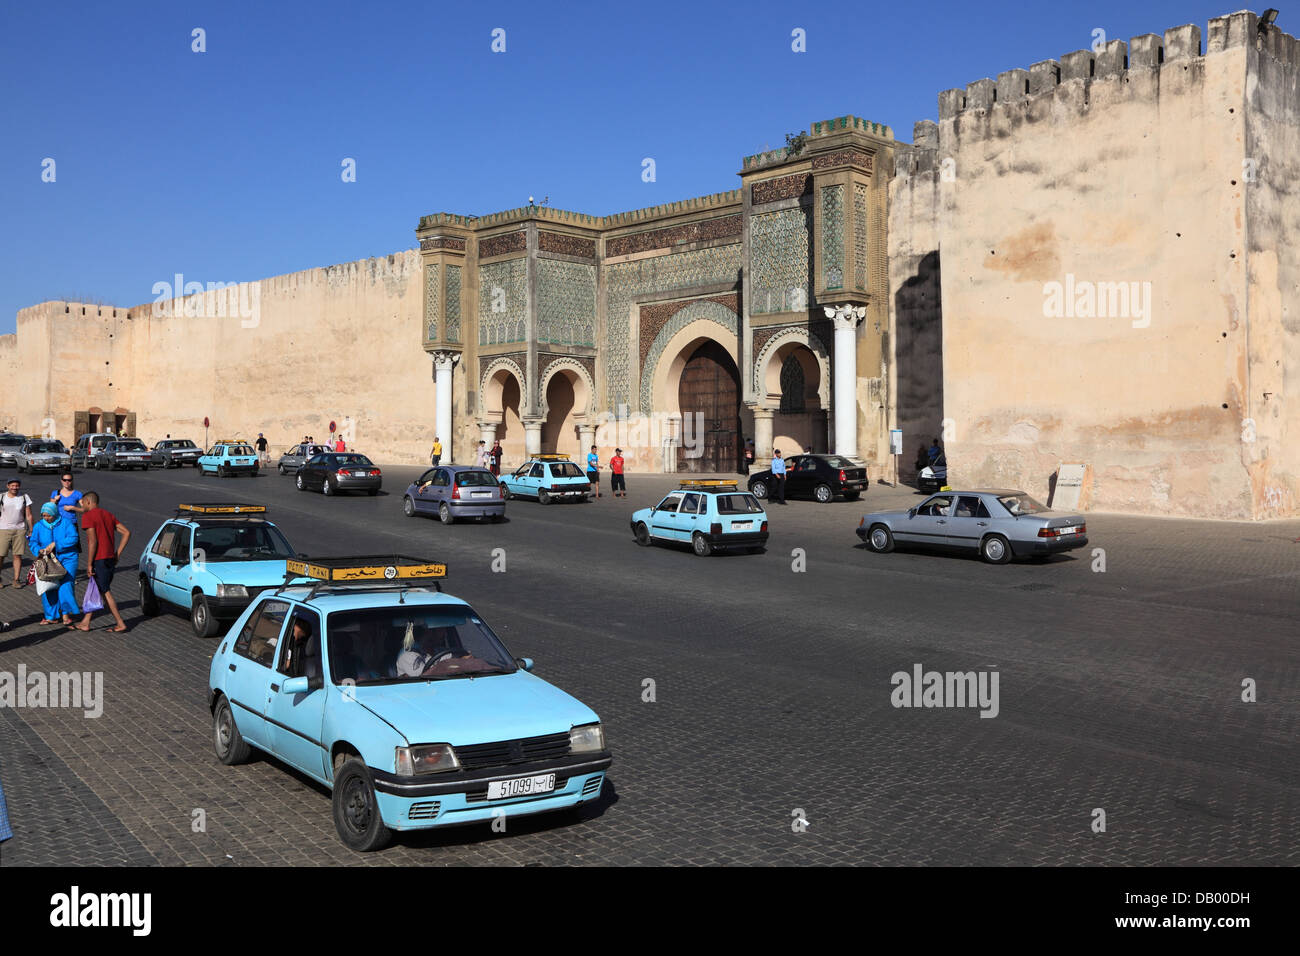 Taxis at the Bab El-Mansour gate in Meknes, Morocco Stock Photo